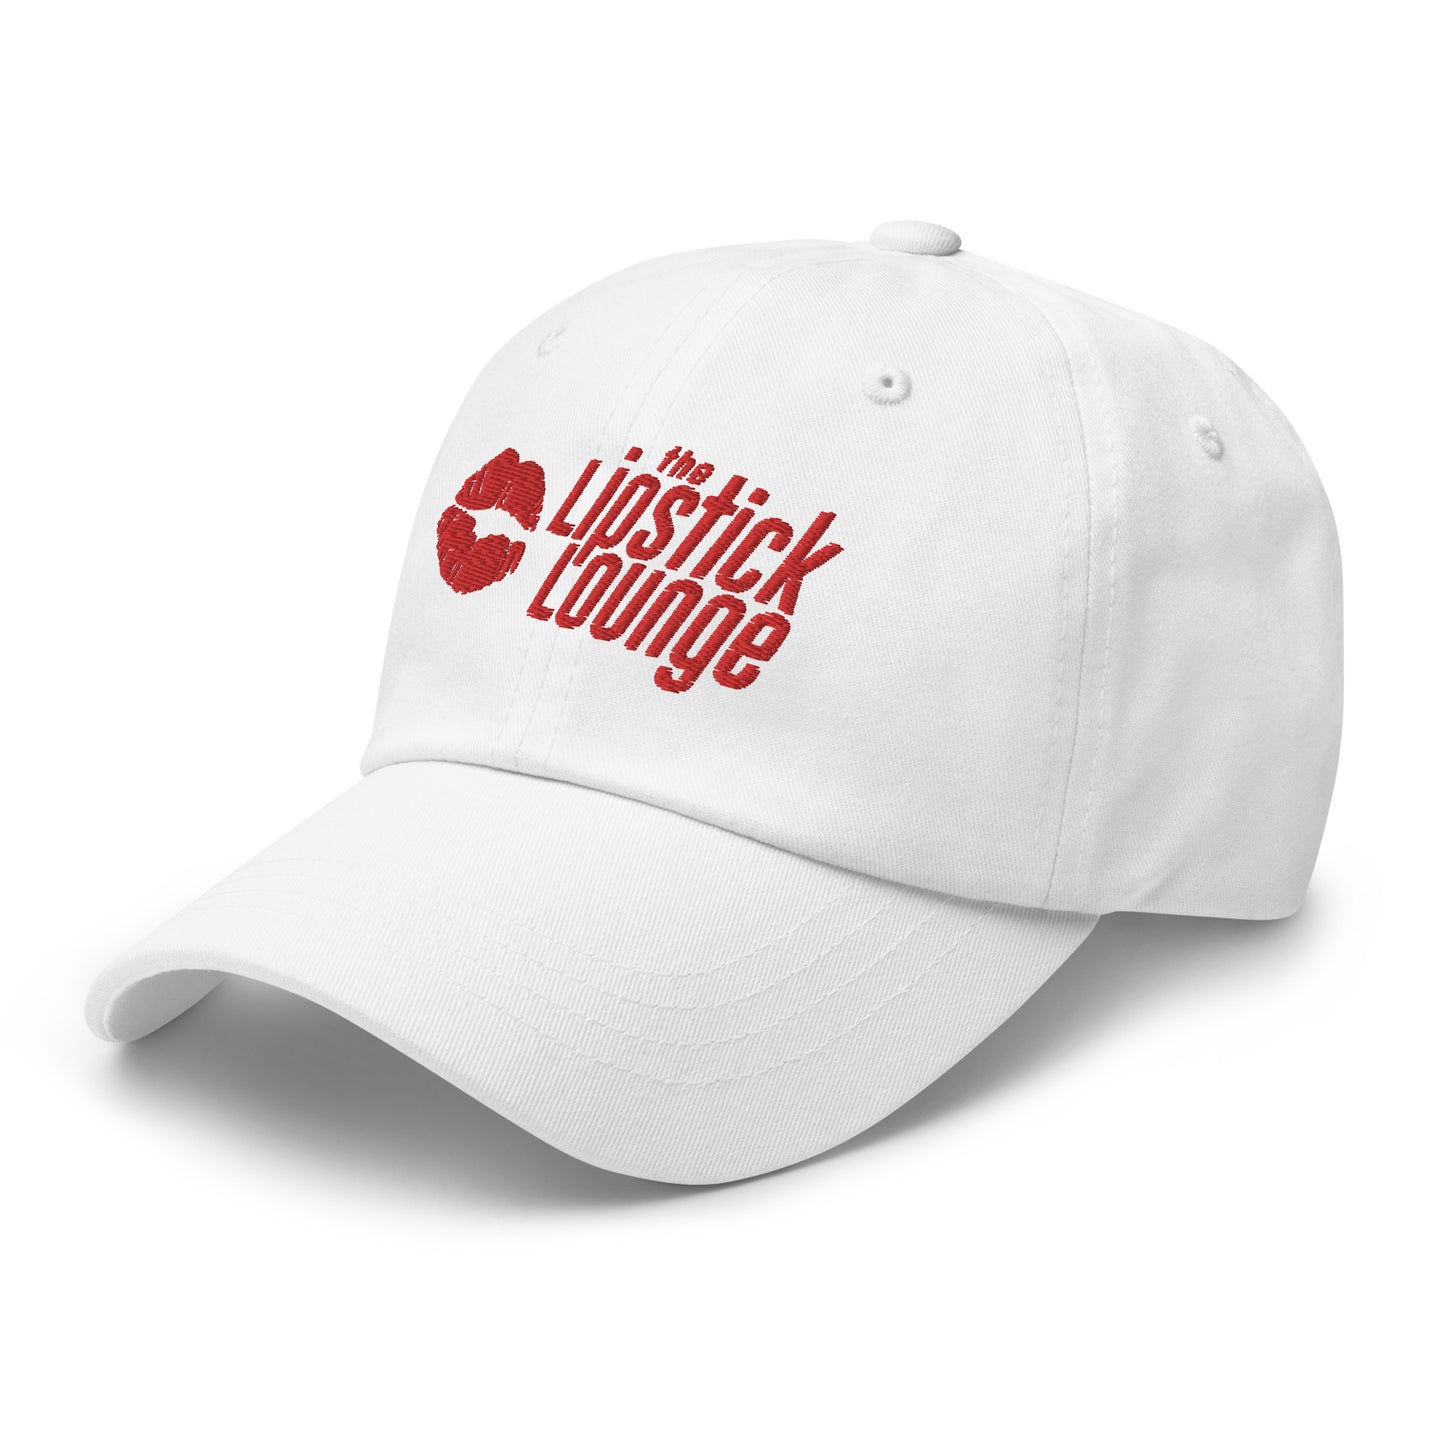 Lipstick Lounge Red Logo Embroidered Hat